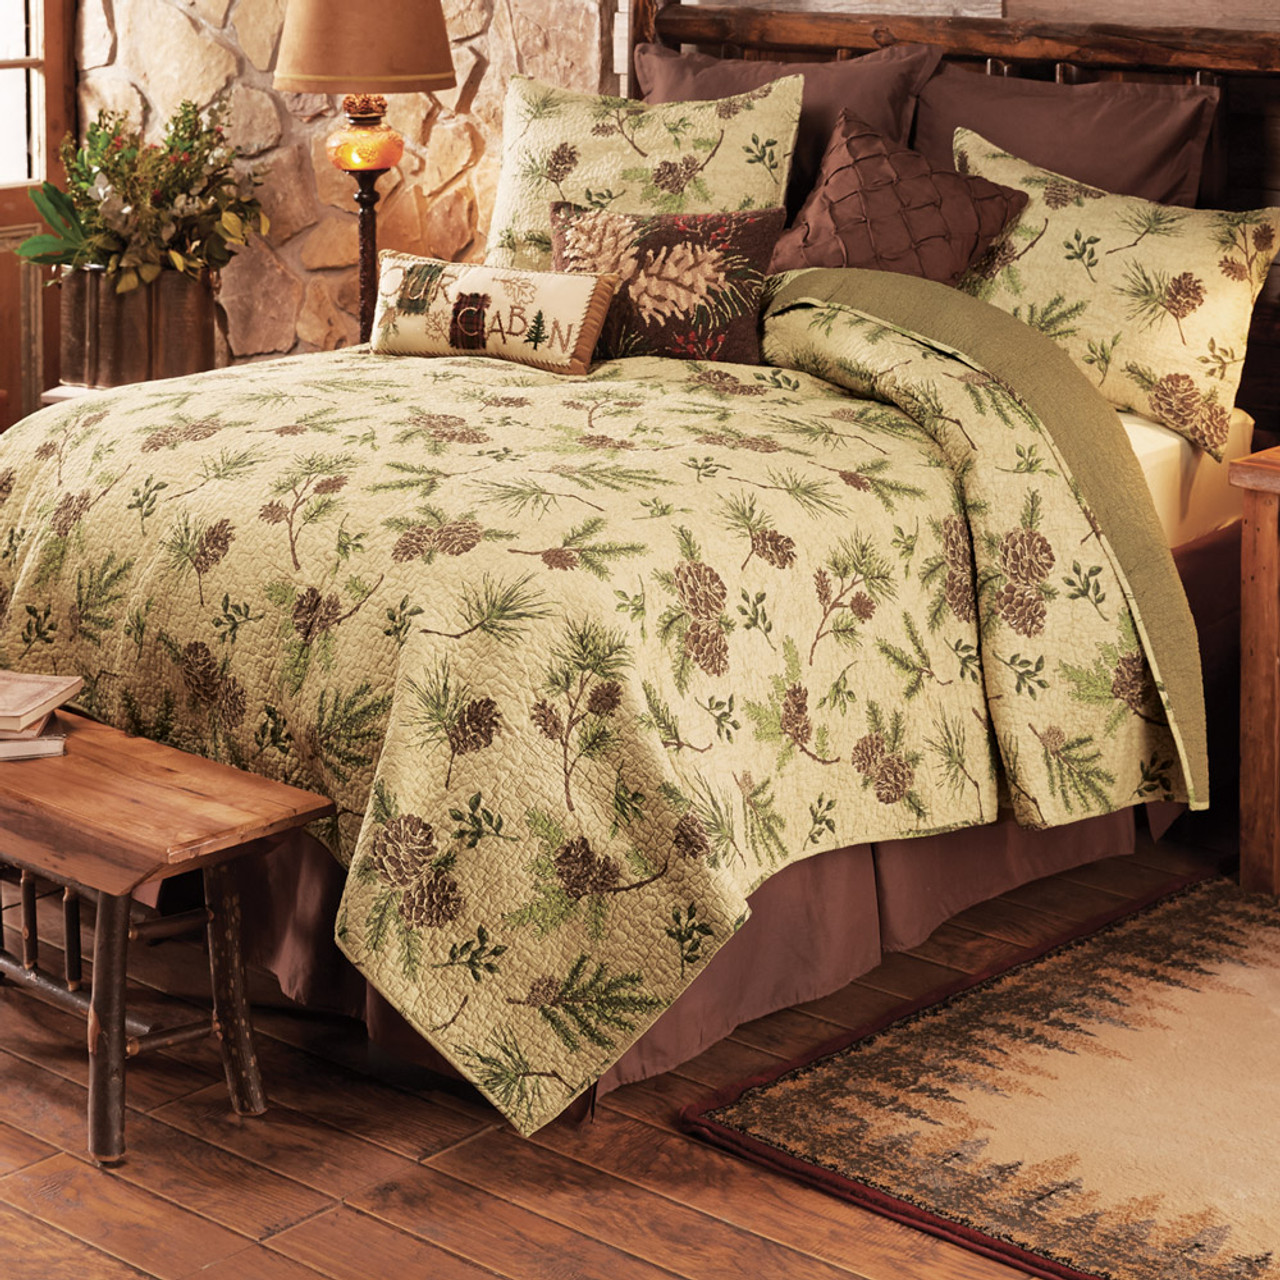 Beddingoutlet Forest Queen Bed Sheets One Piece Coniferous Tree